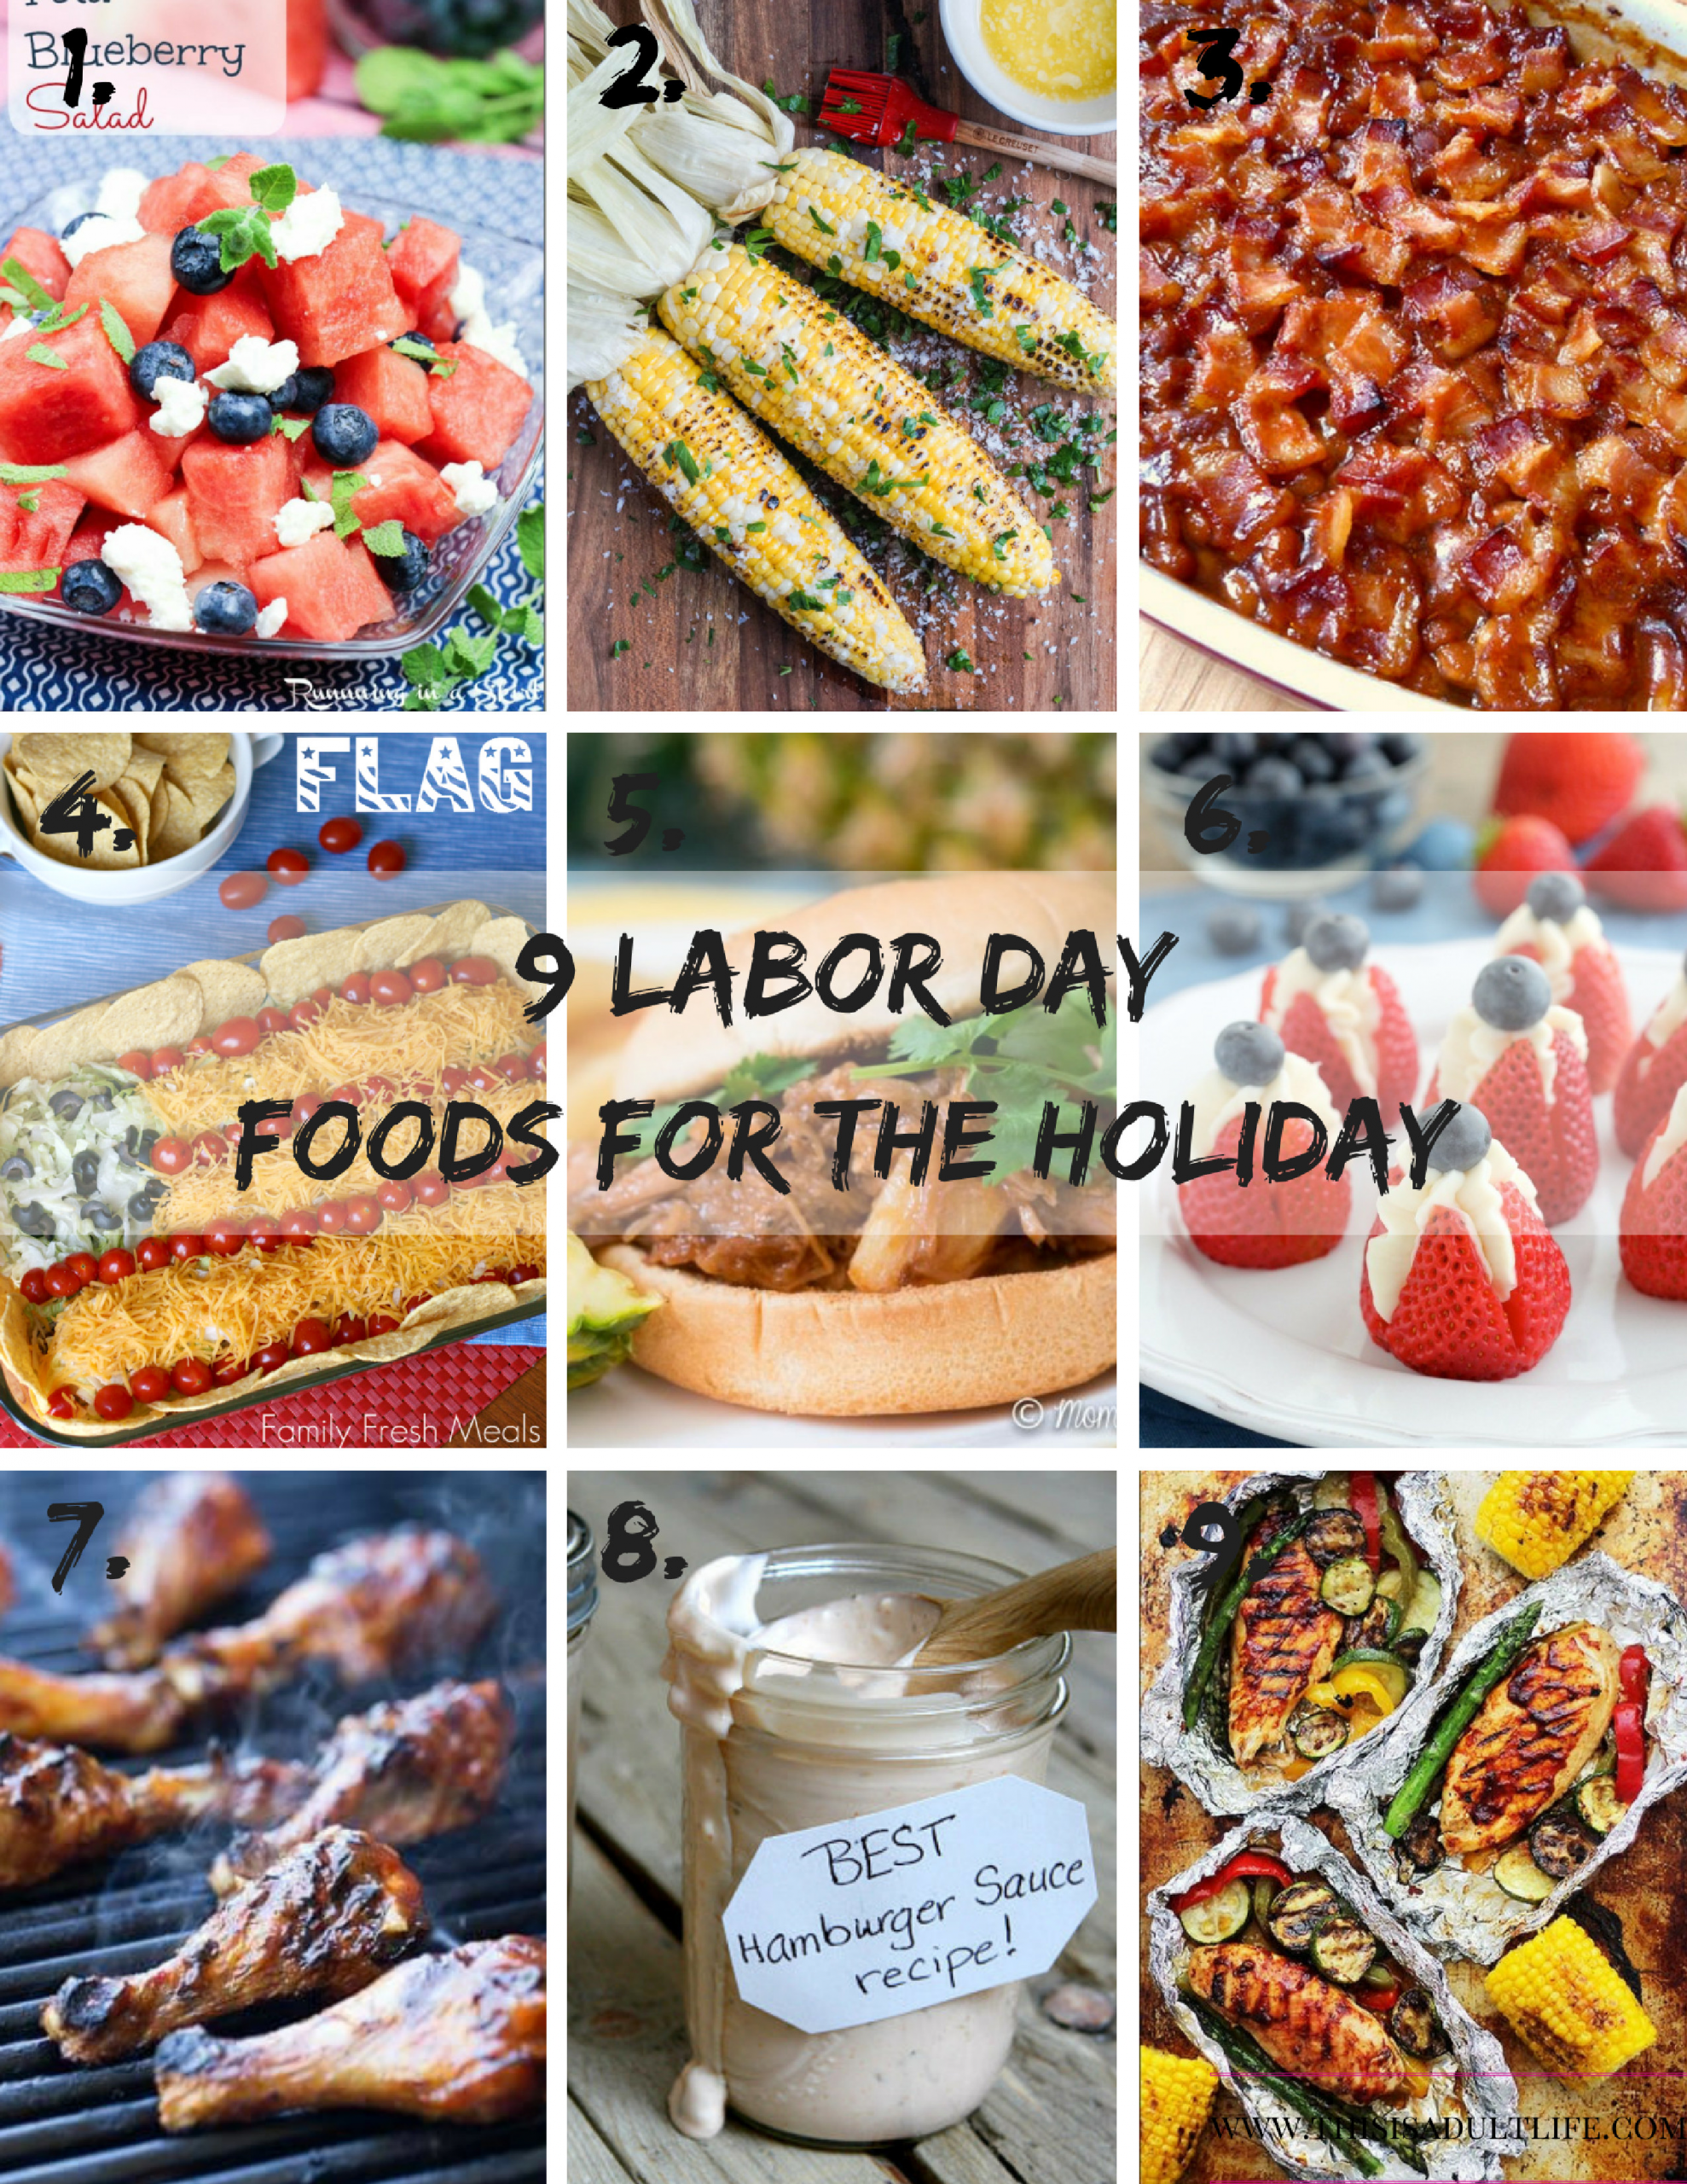 Labor Day Meal Ideas
 9 Labor Day Food Ideas for the Holiday This is Adult Life